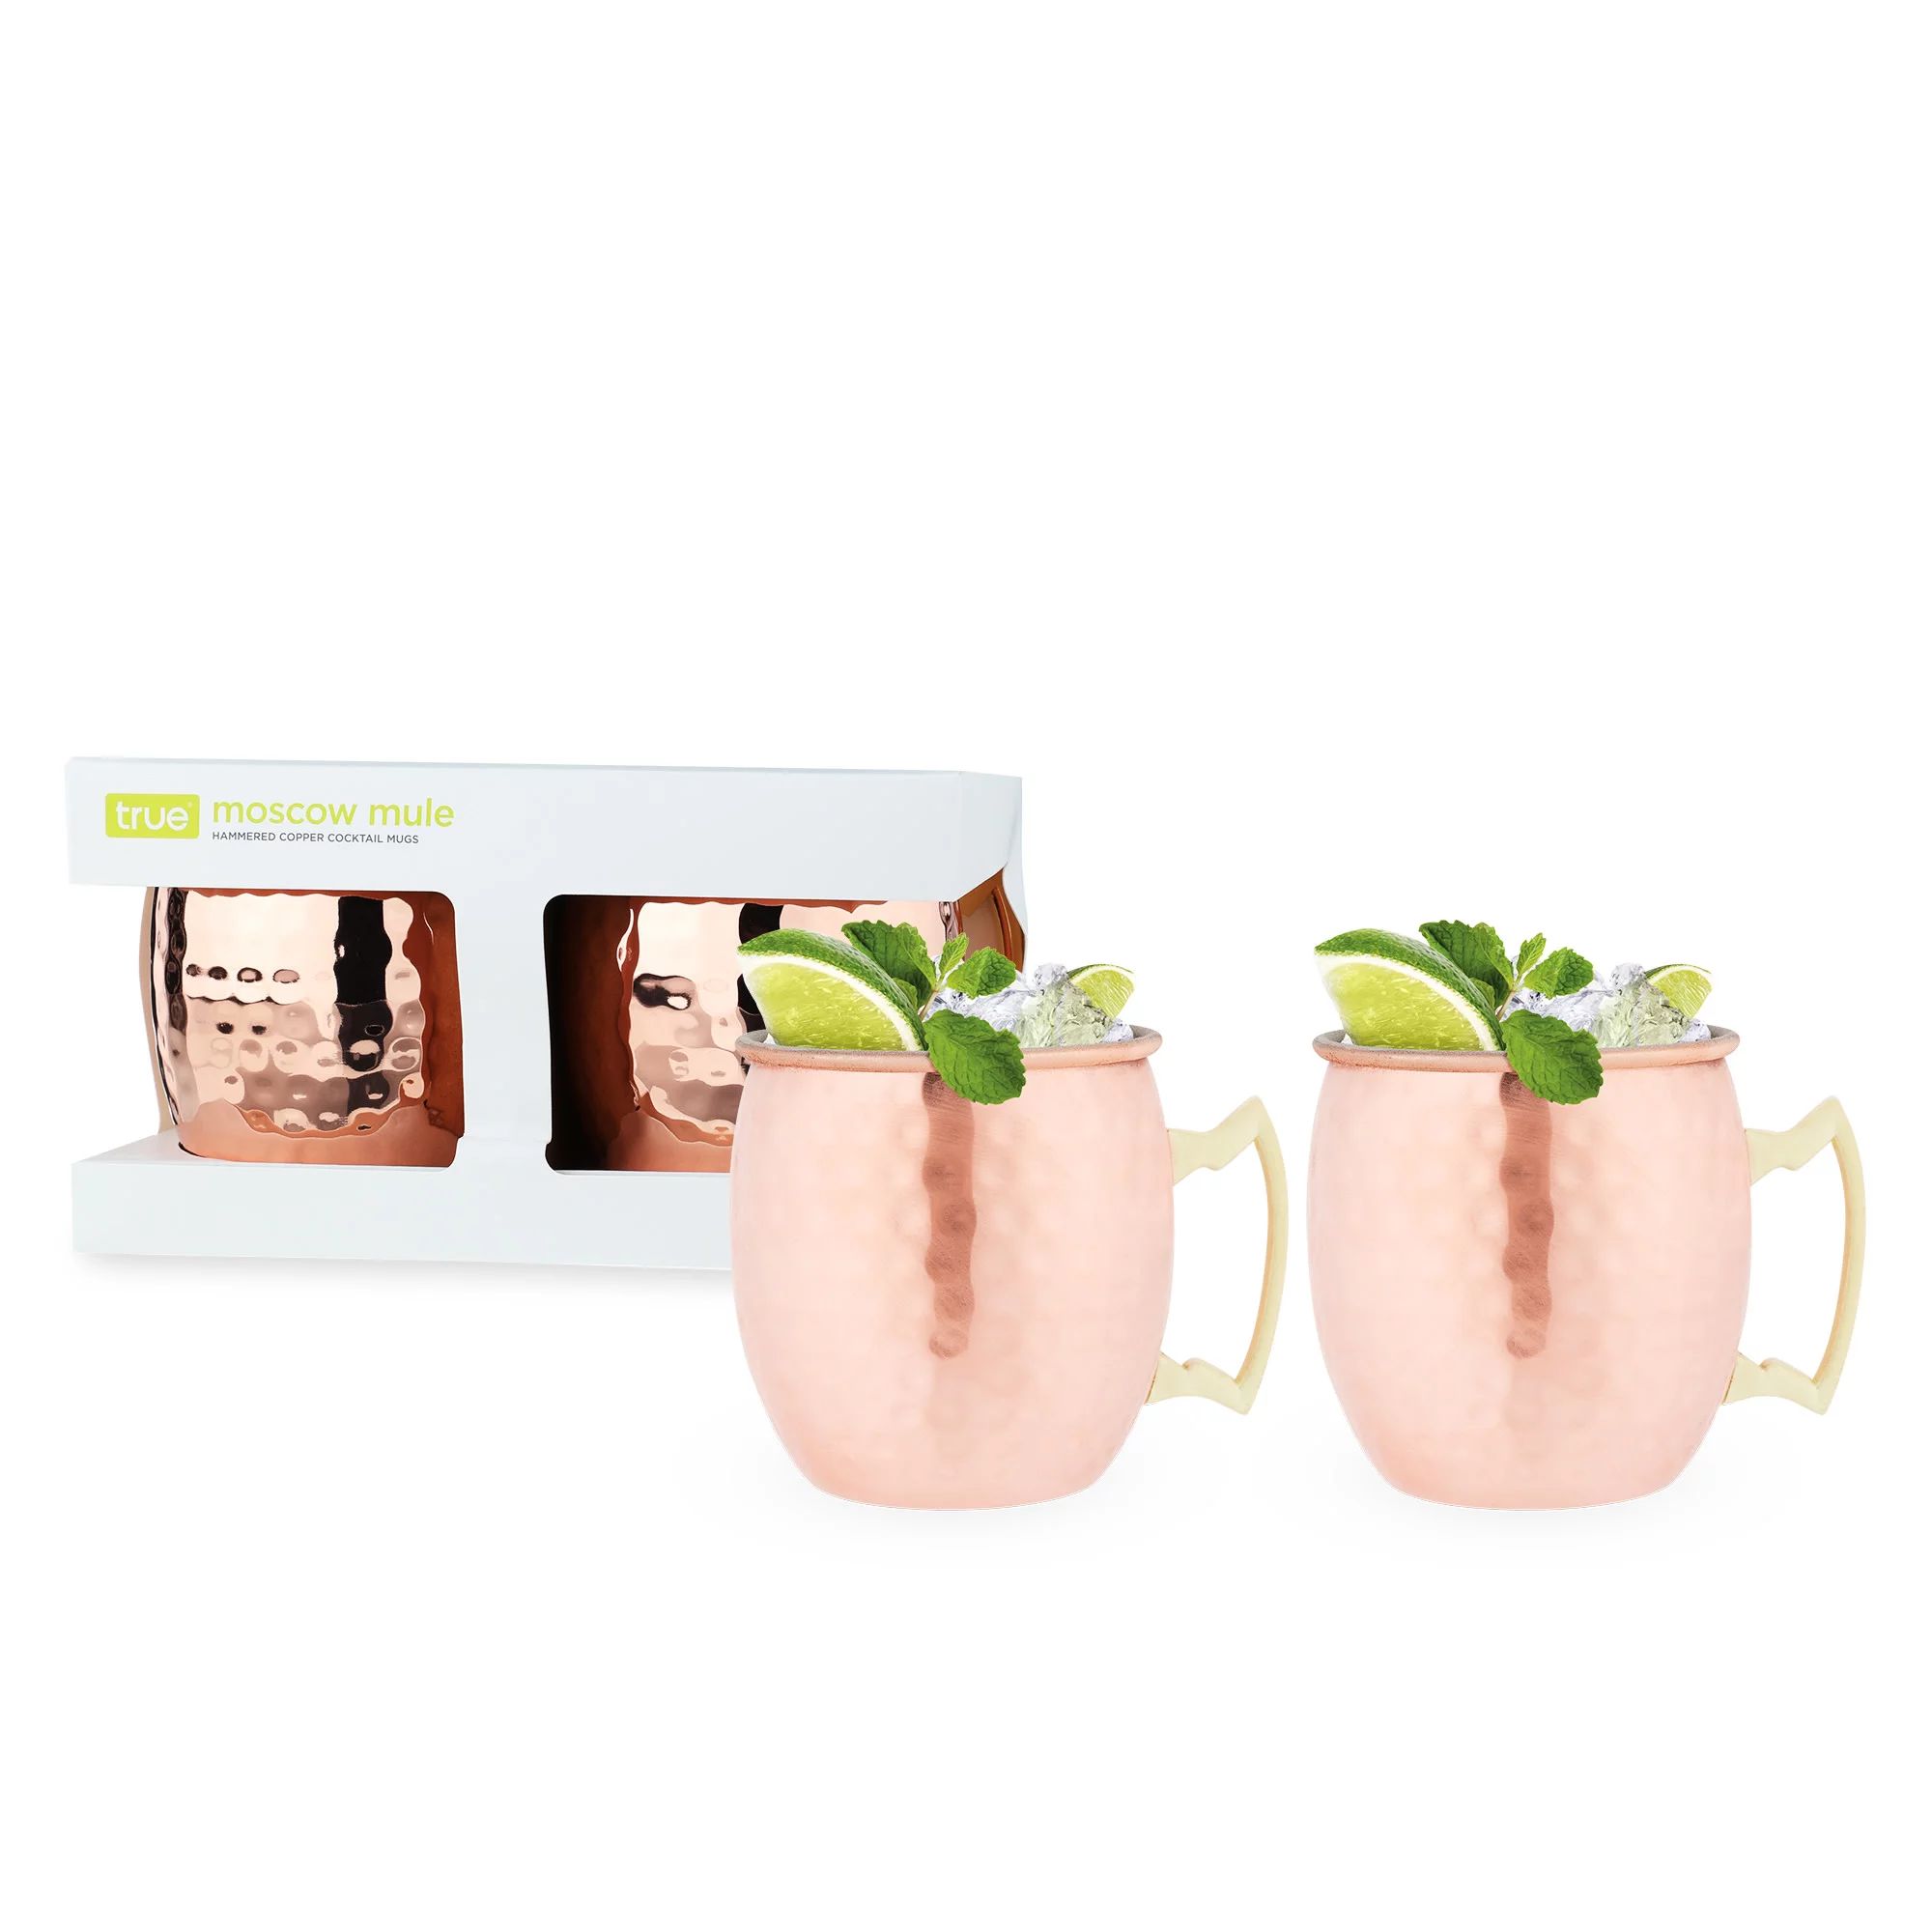 True Moscow Mule Mug Set of 2, Stainless Steel, Copper Finish, Holds 16 oz, Cocktail Drinkware | Walmart (US)